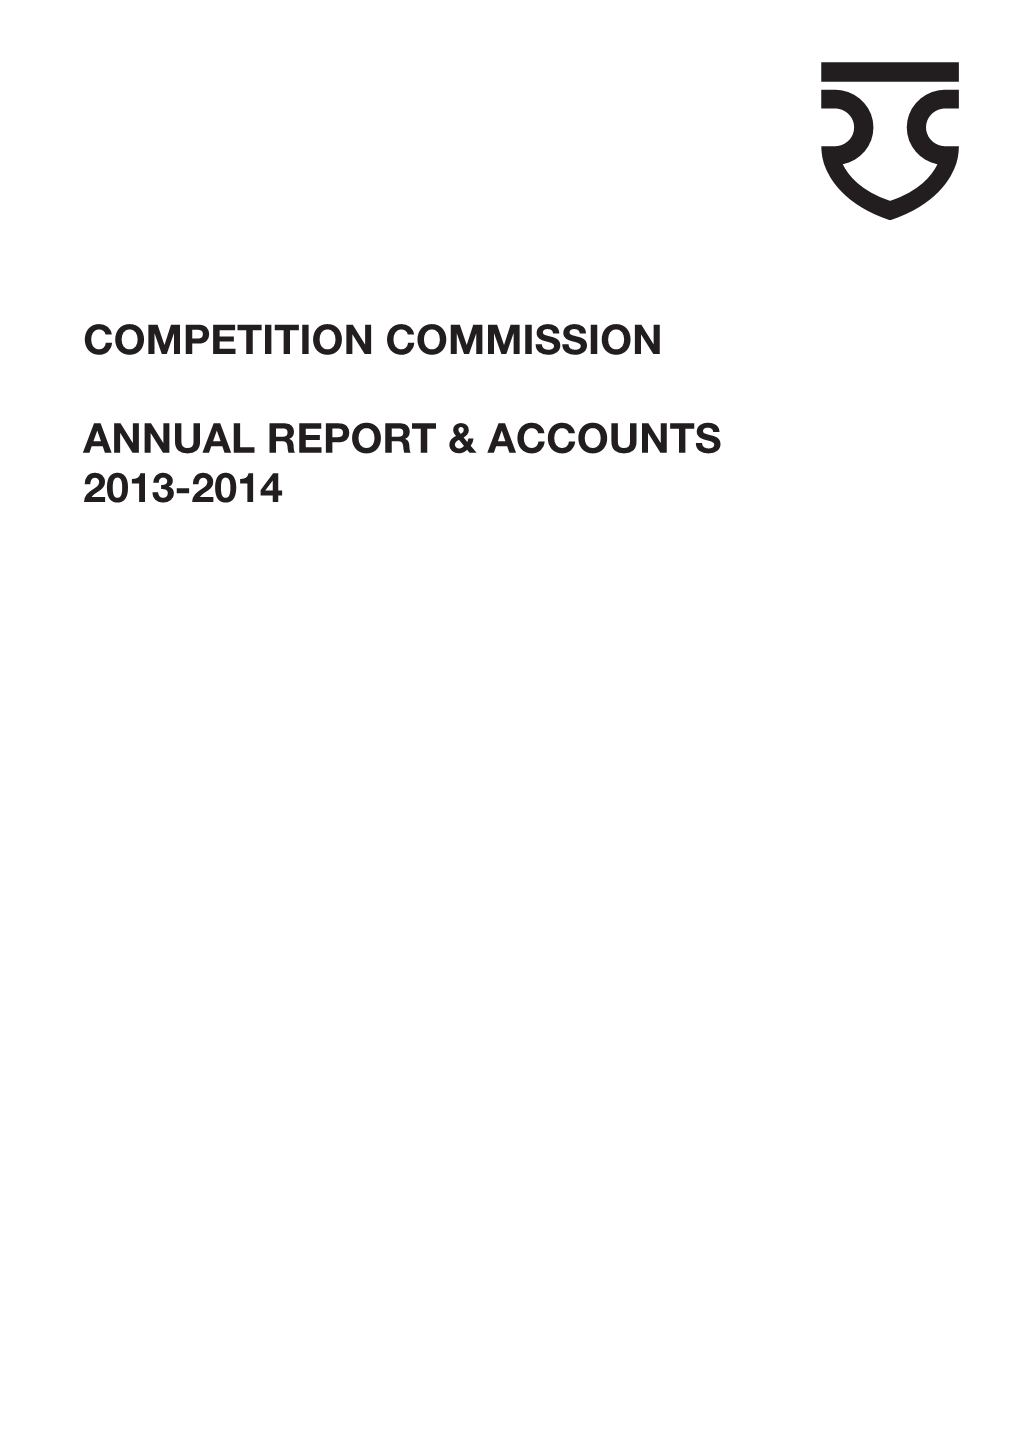 Competition Commission Annual Report and Accounts 2013-2014